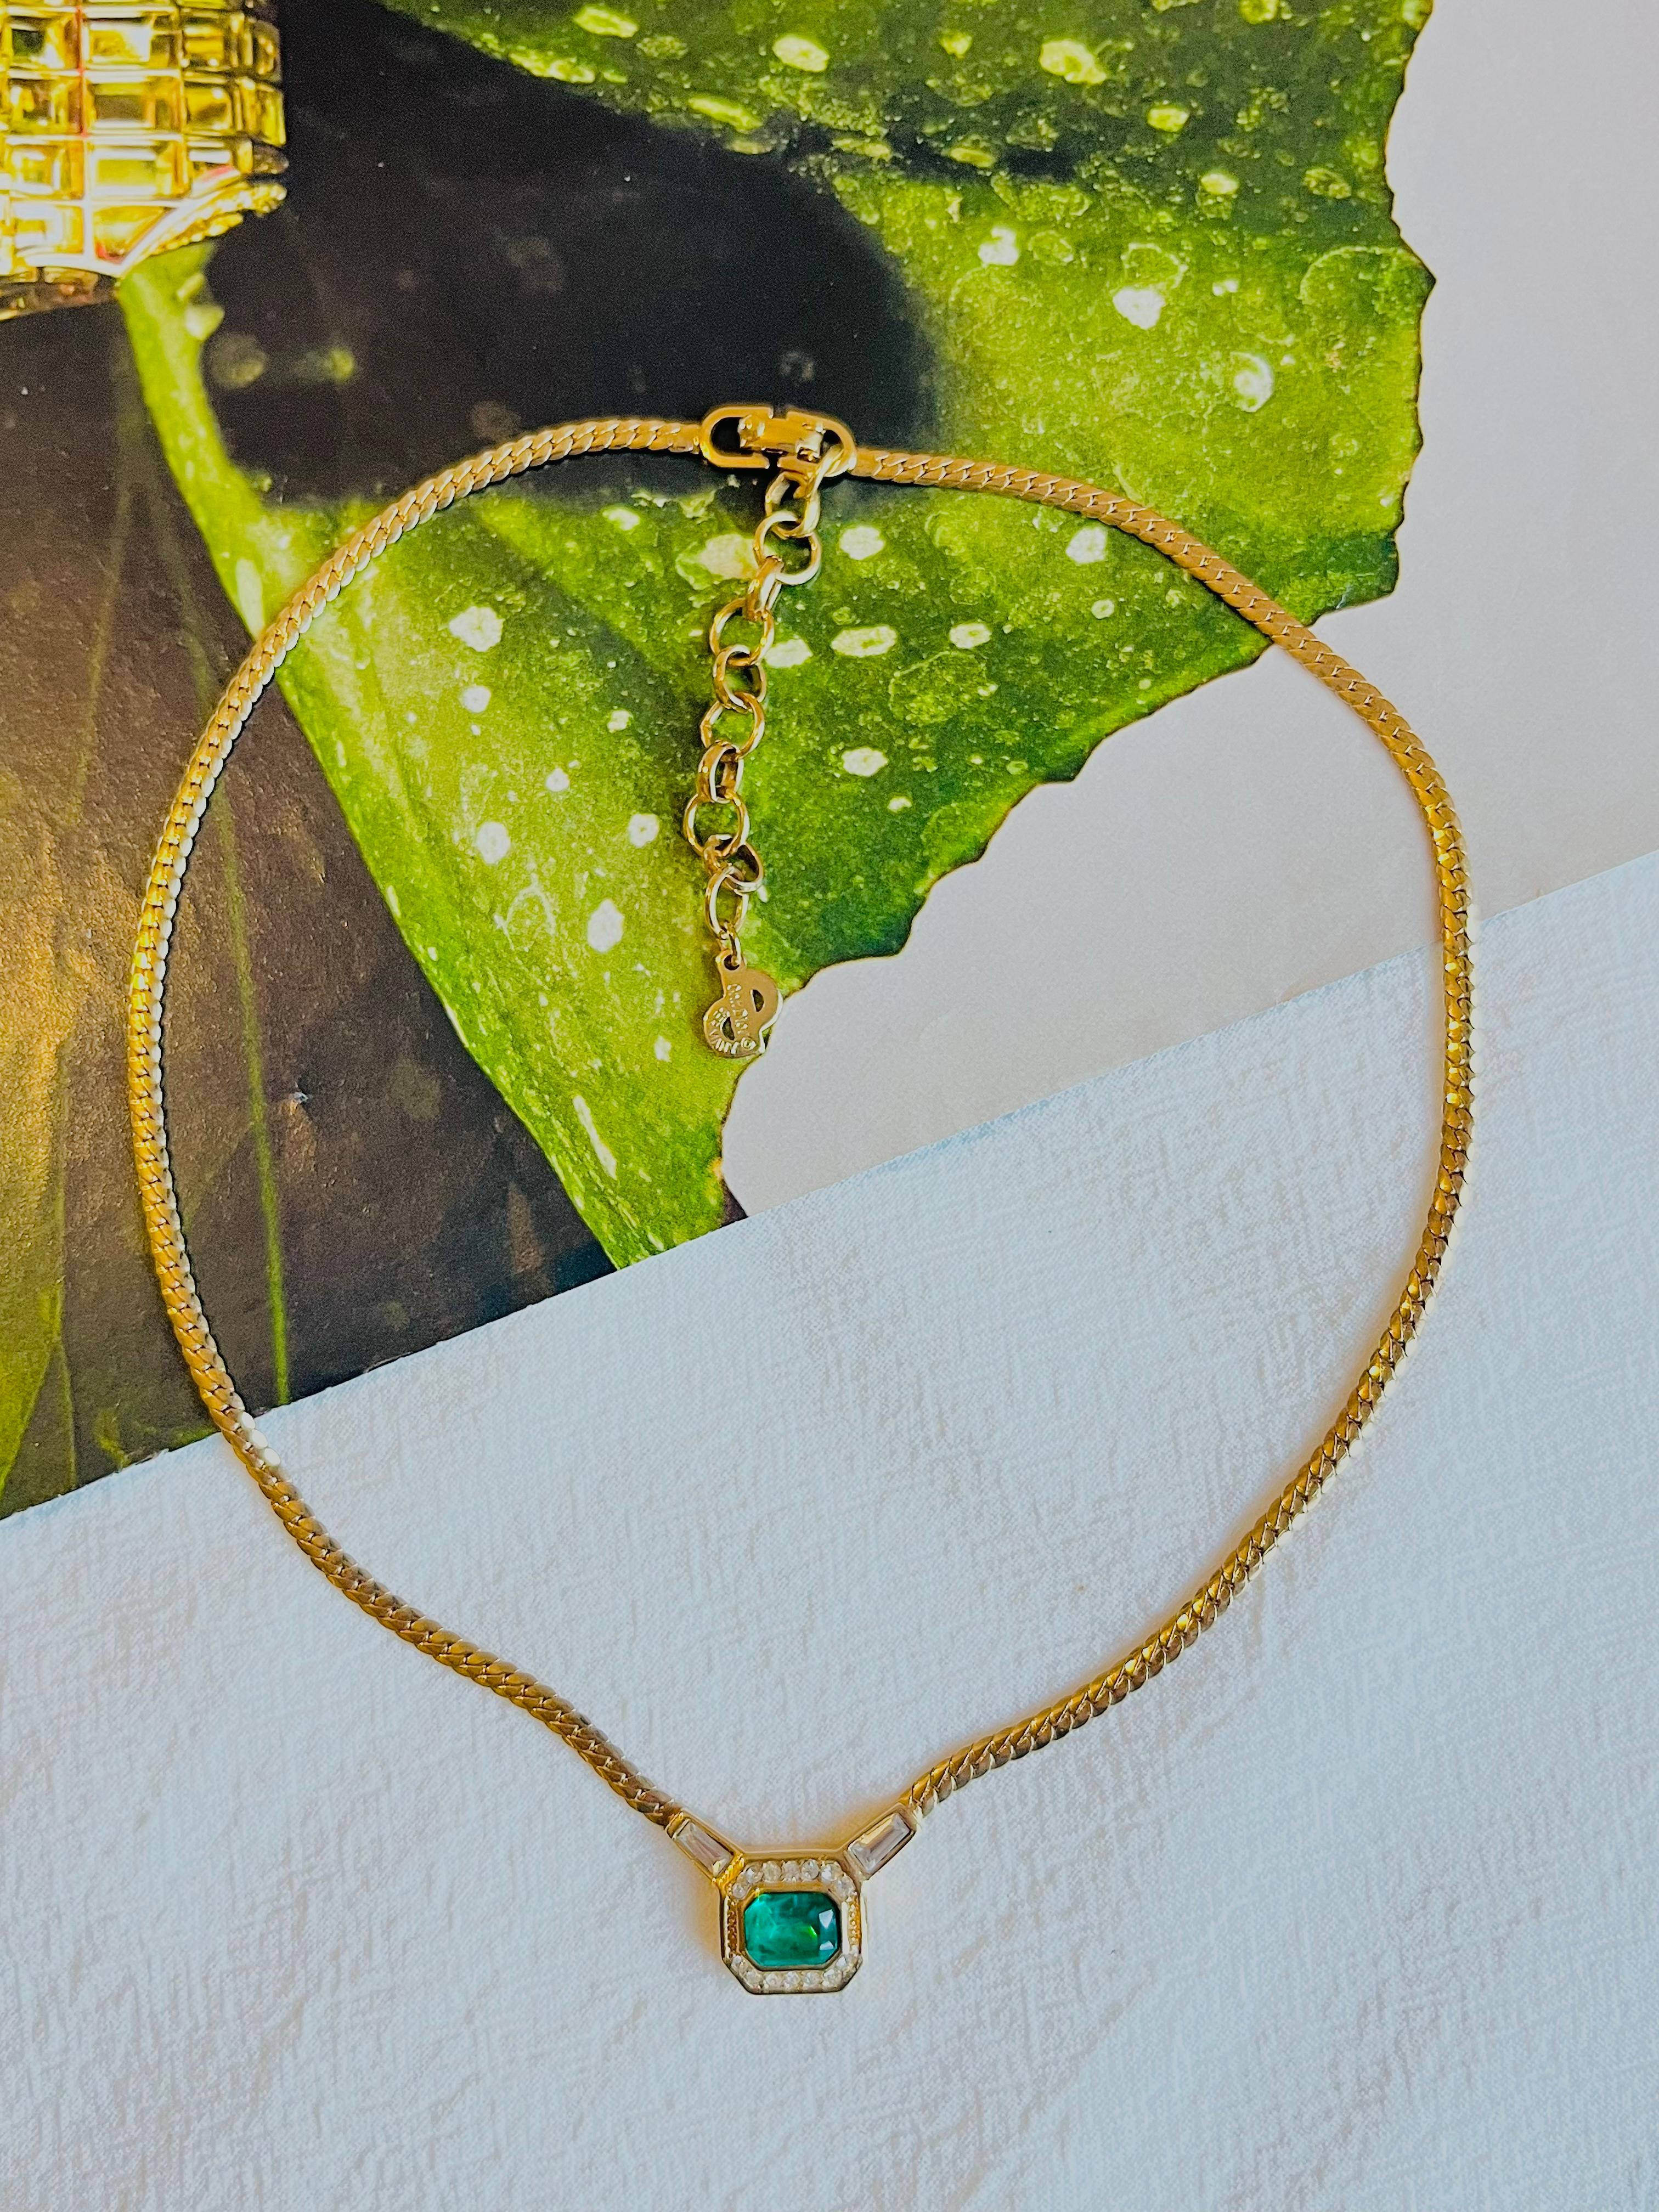 Very excellent condition. 100% Genuine.

Crafted from gold plated brass with a snake chain, this necklace from Christian Dior is adorned with an emerald green gemstone embellishment, punctuated with Swarovski crystal accents.

Marked 'Chr.Dior (C)